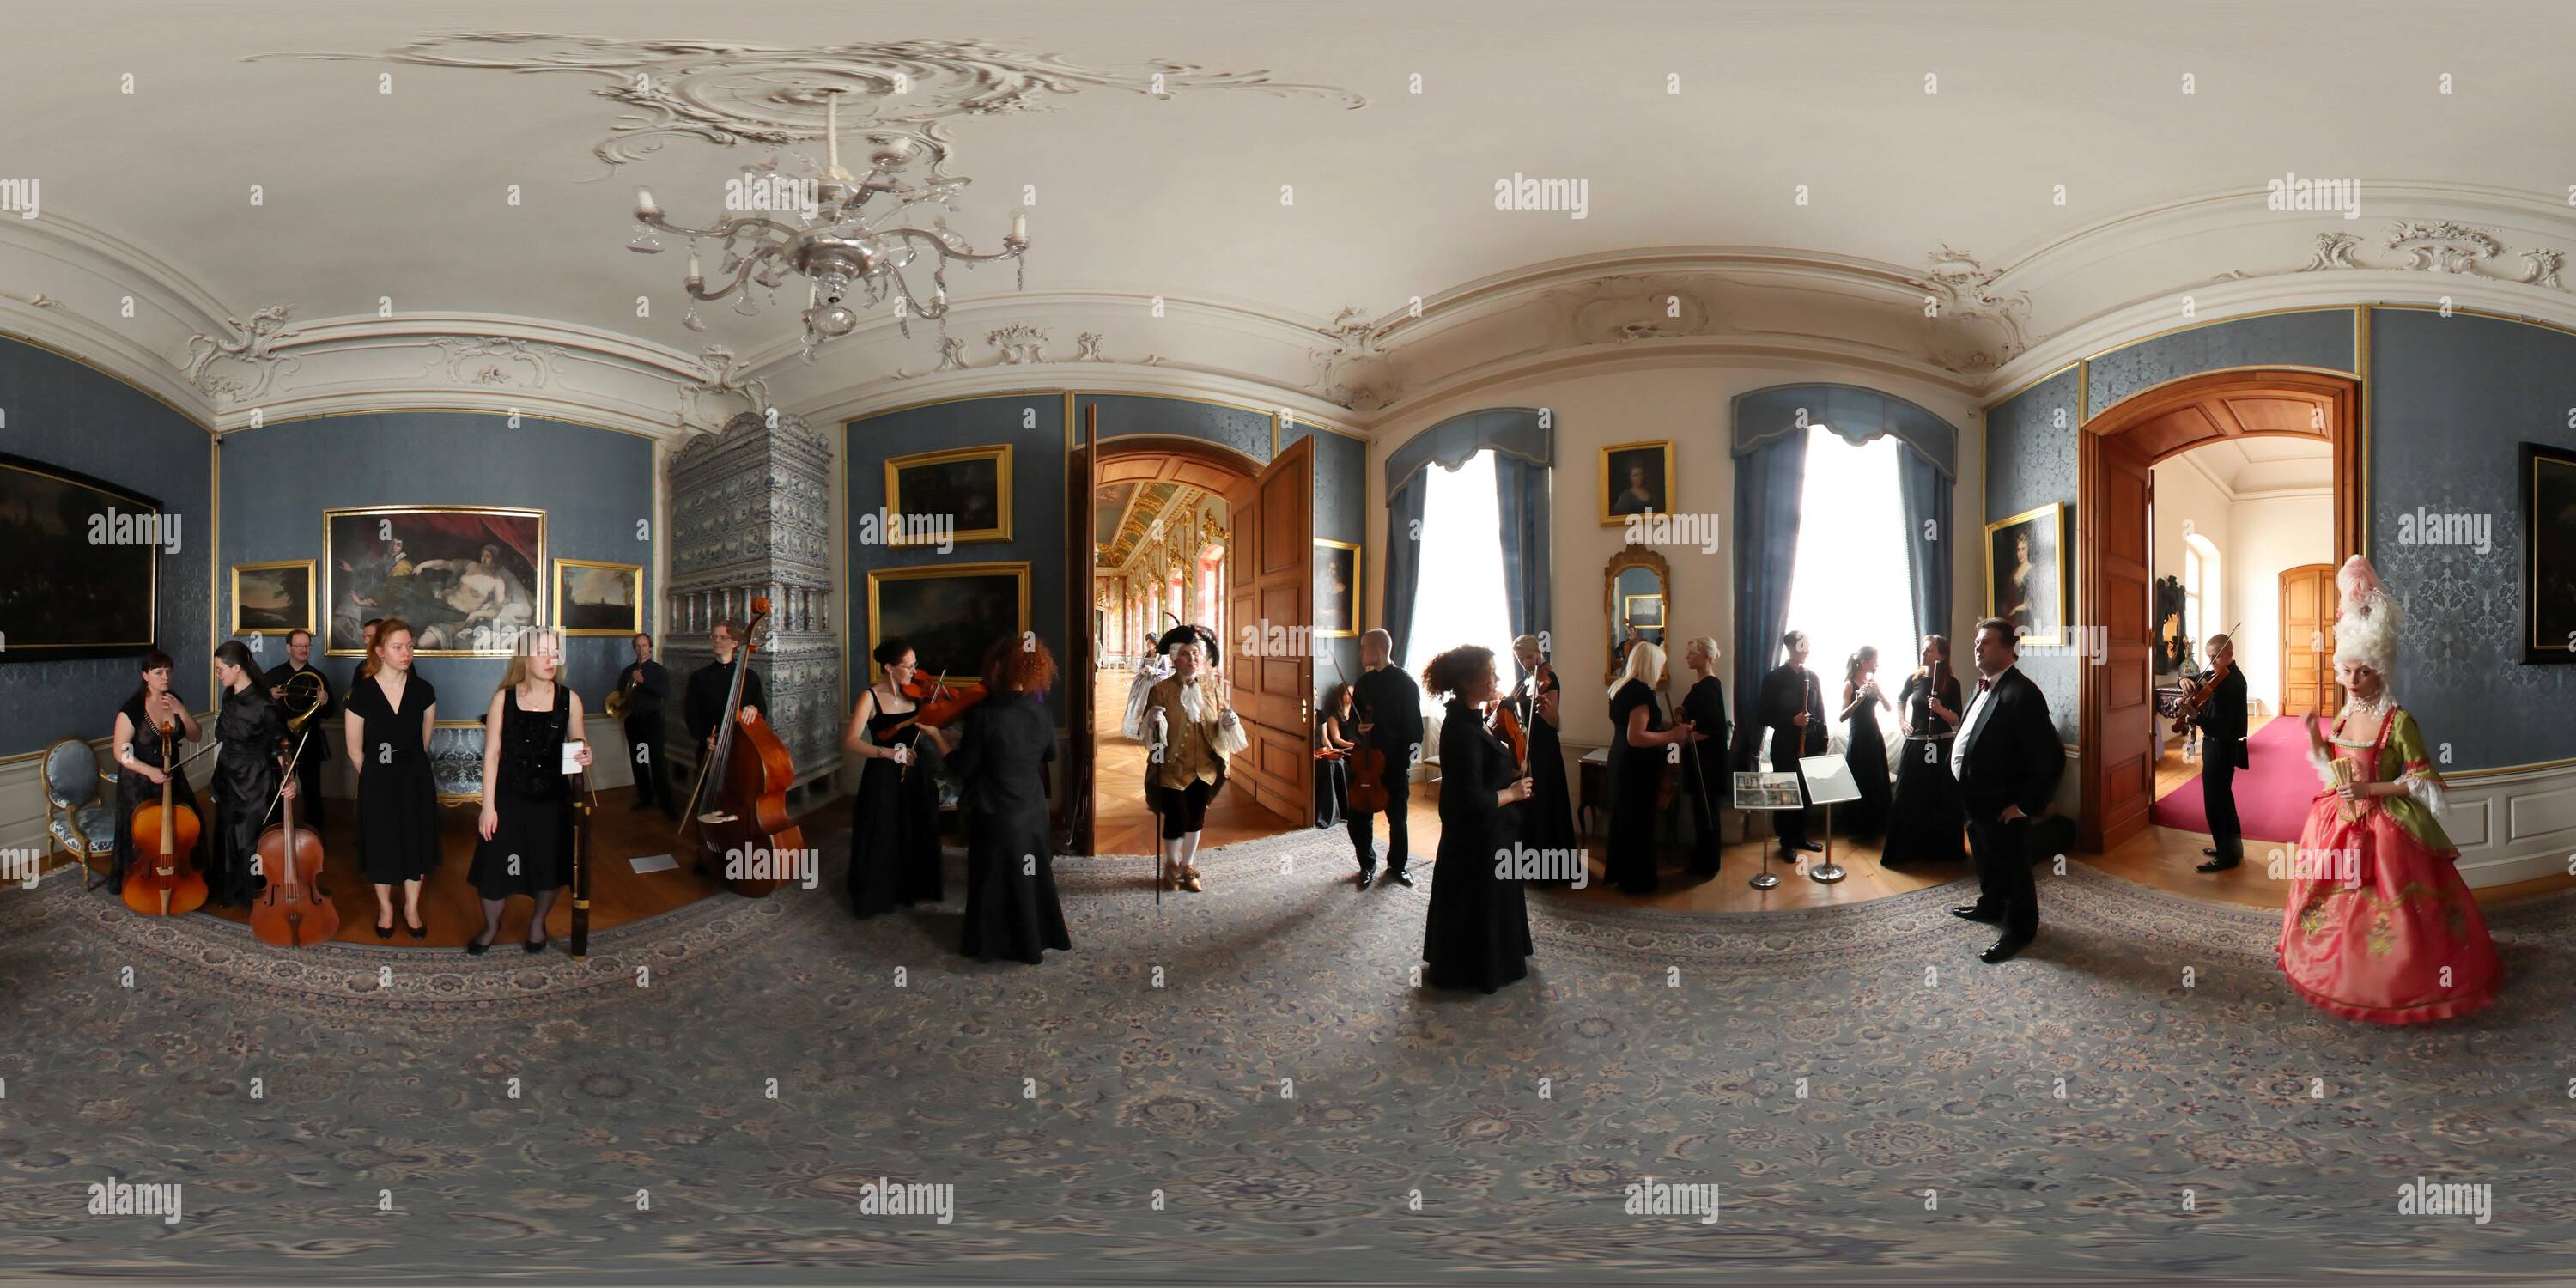 360 degree panoramic view of Last moments before the 18th century opera performance at Rundale Palace, Latvia